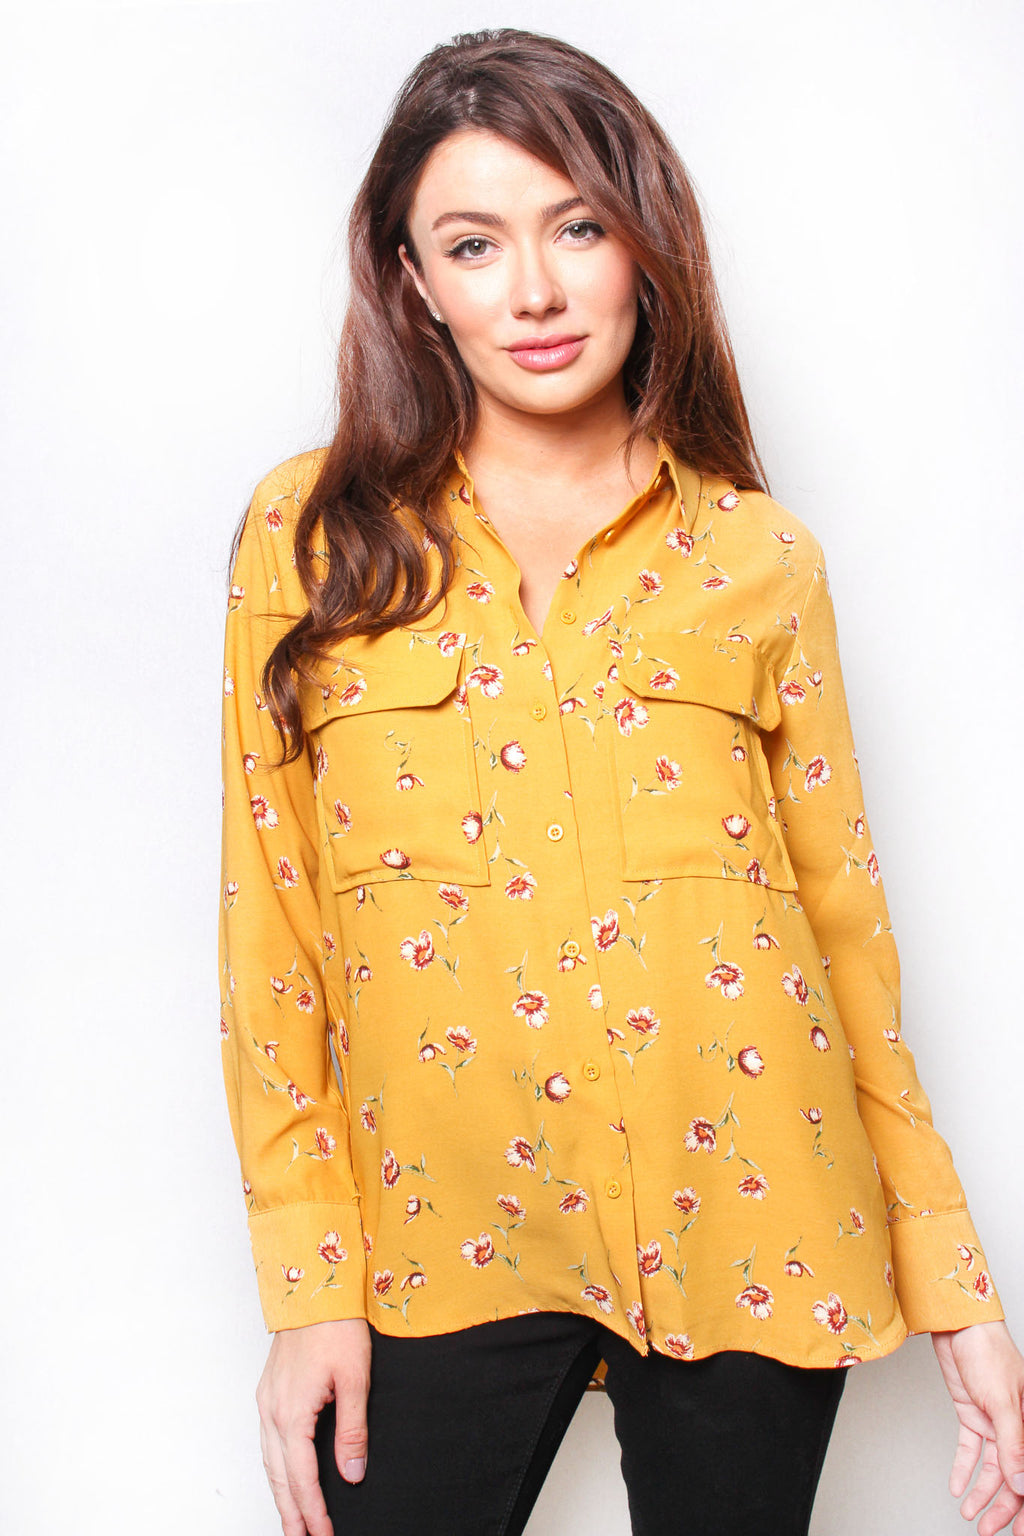 Women's Long Sleeve Floral Button Down Pocket Top